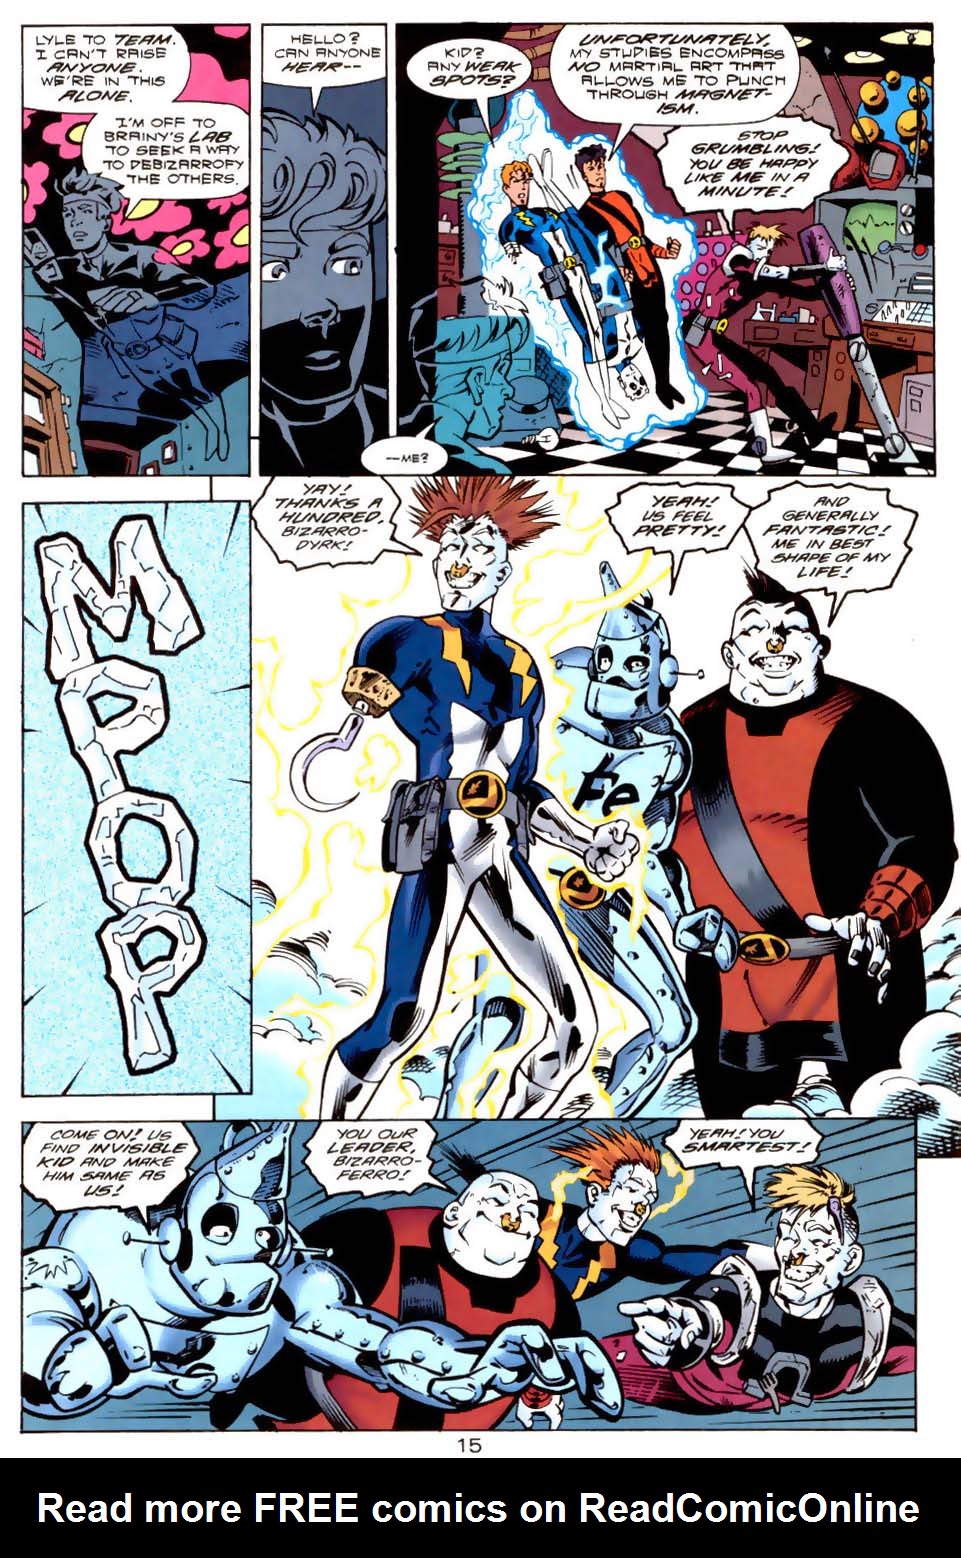 Legion of Super-Heroes (1989) 114 Page 15